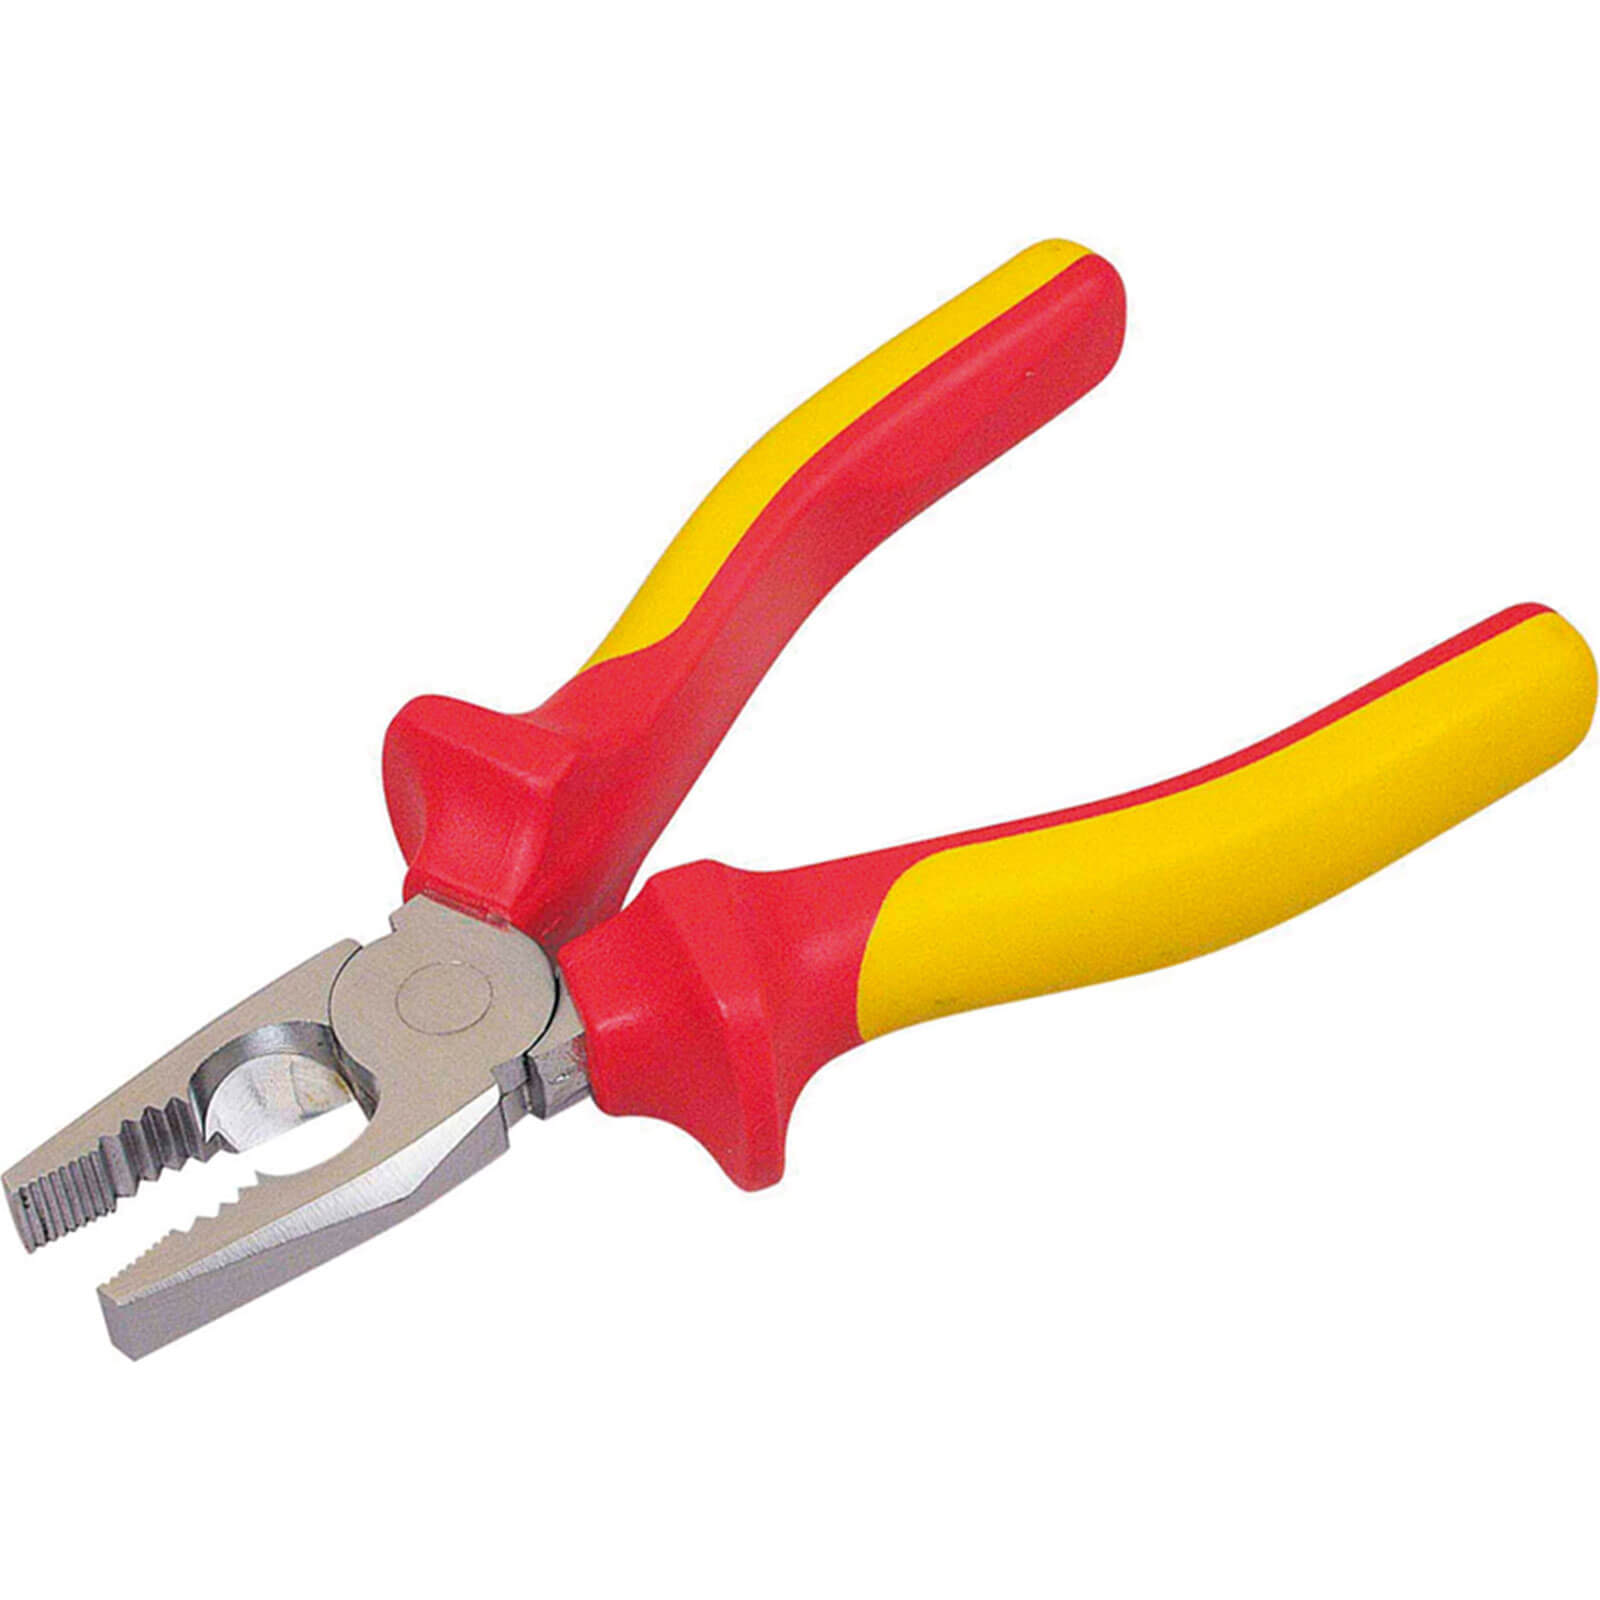 Image of Stanley Insulated VDE Combination Pliers 160mm